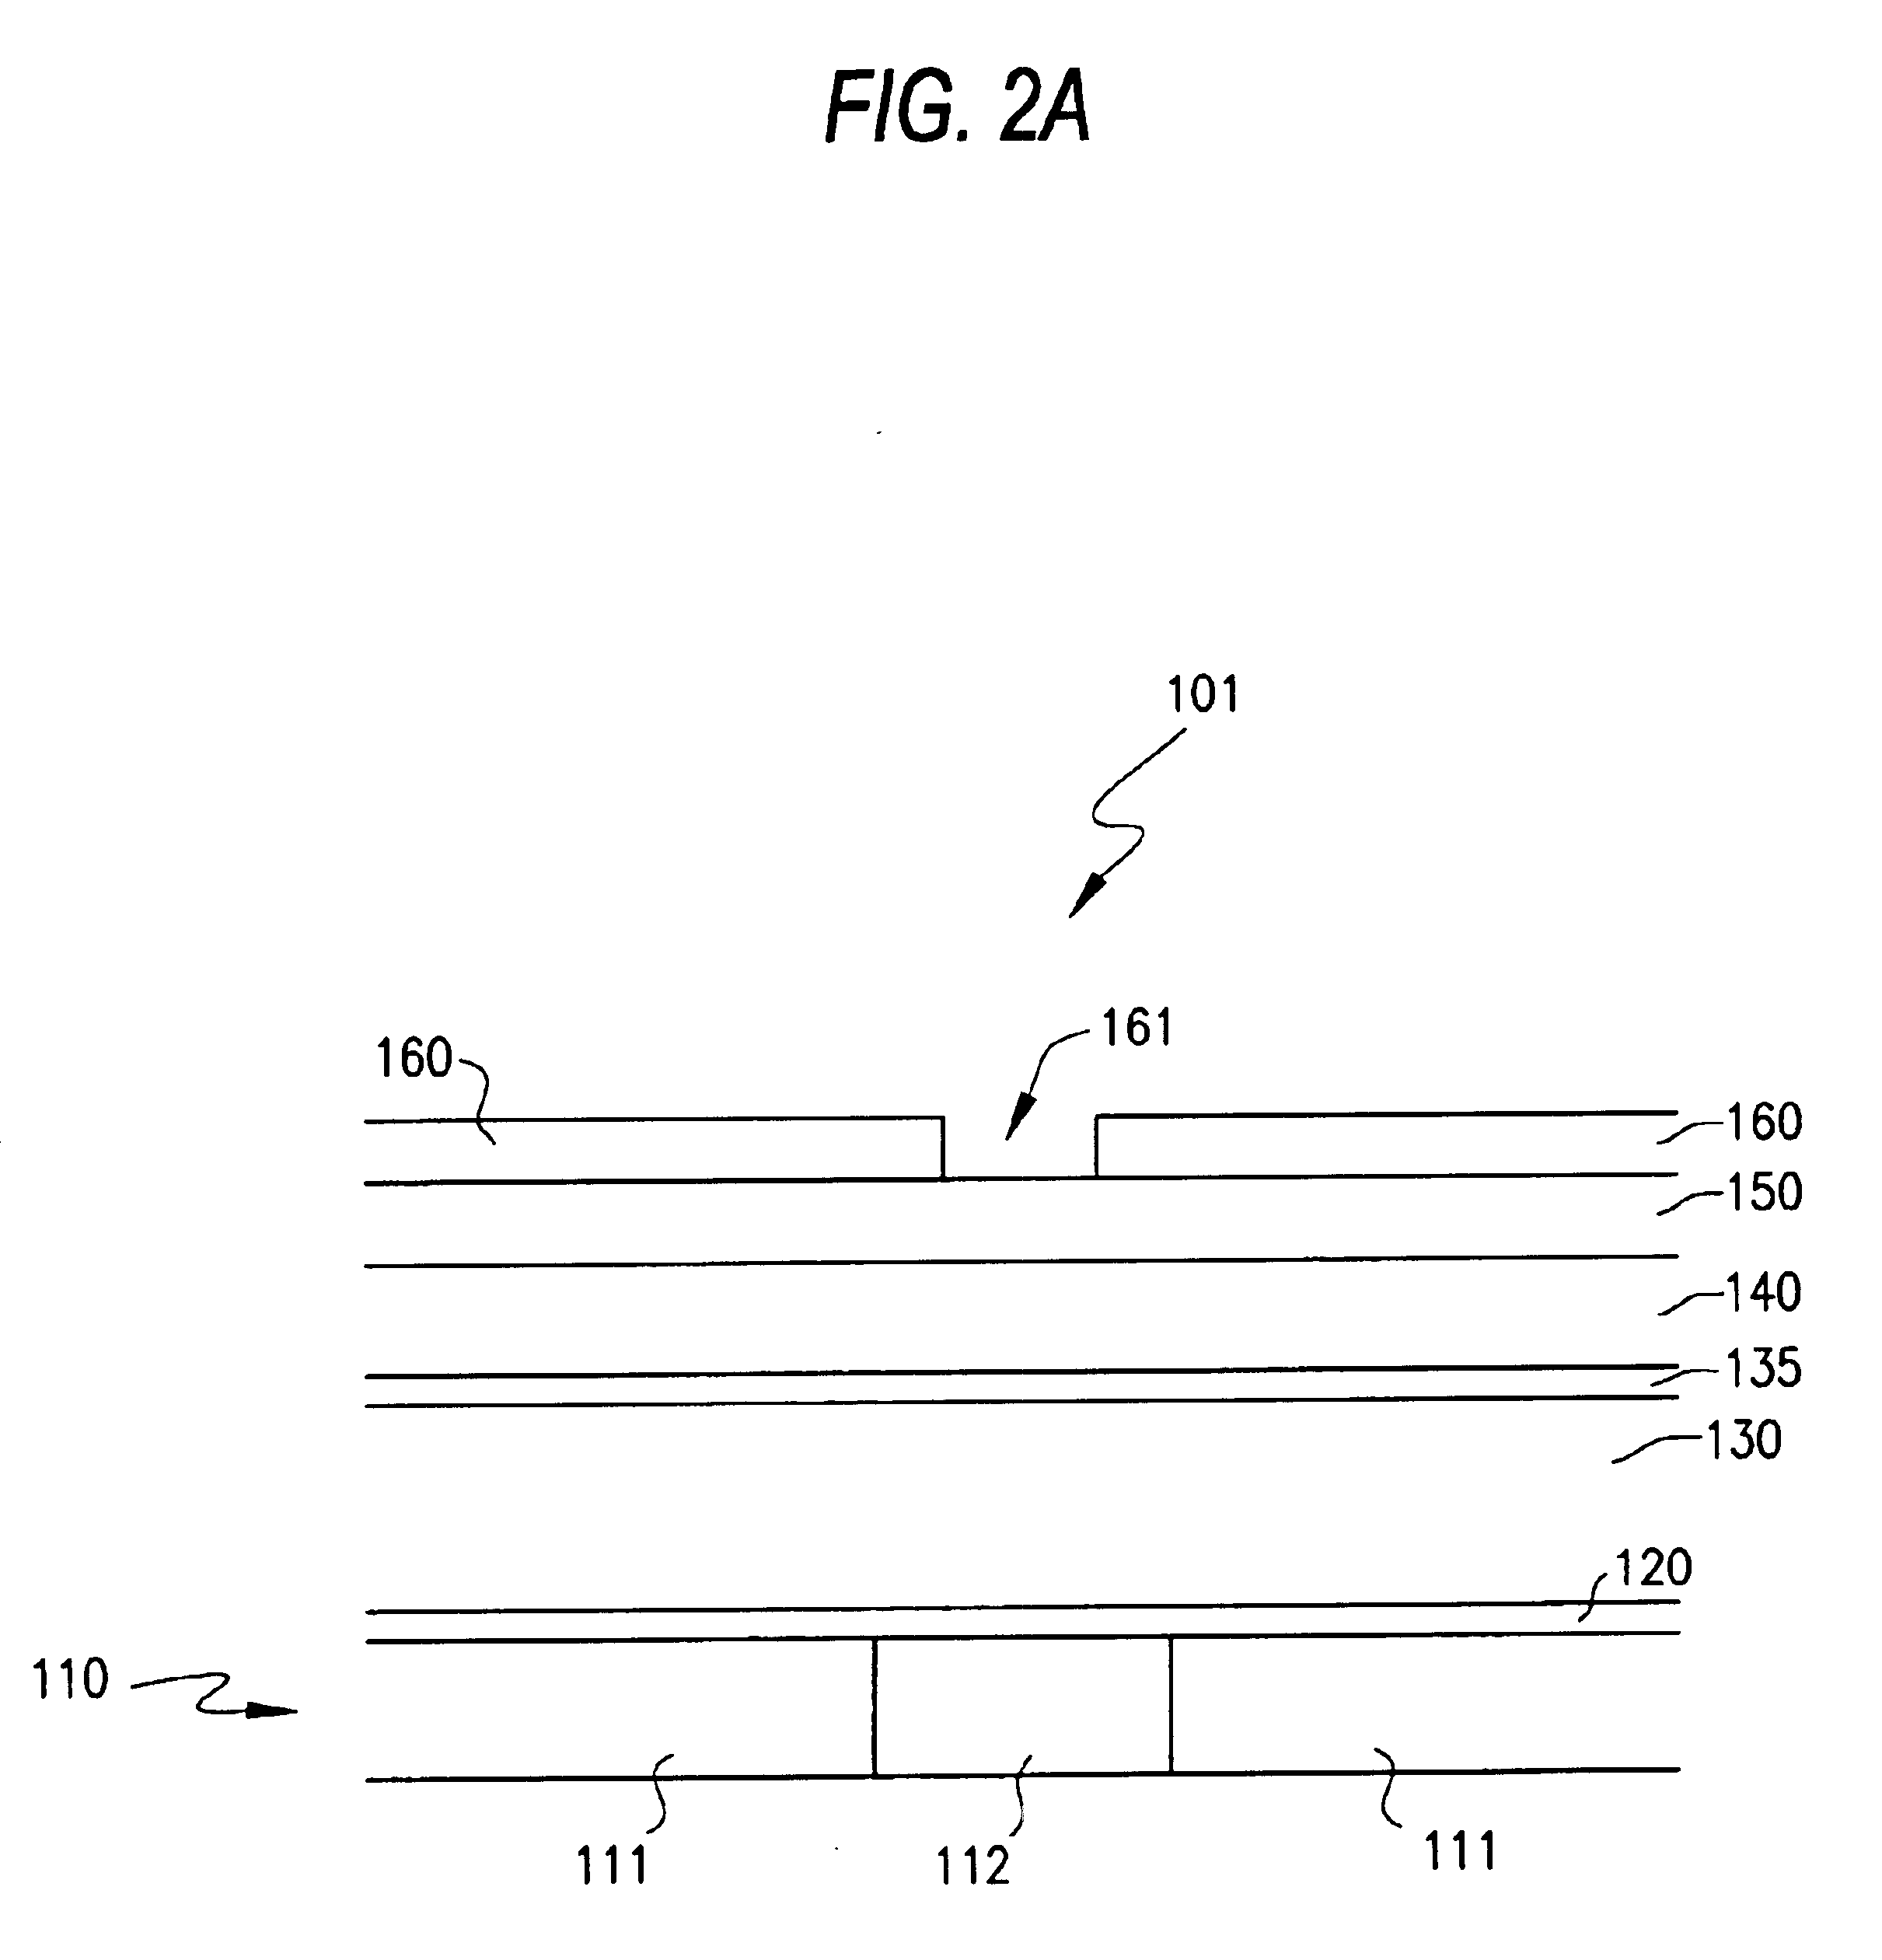 Method of fabricating a semiconductor multilevel interconnect structure